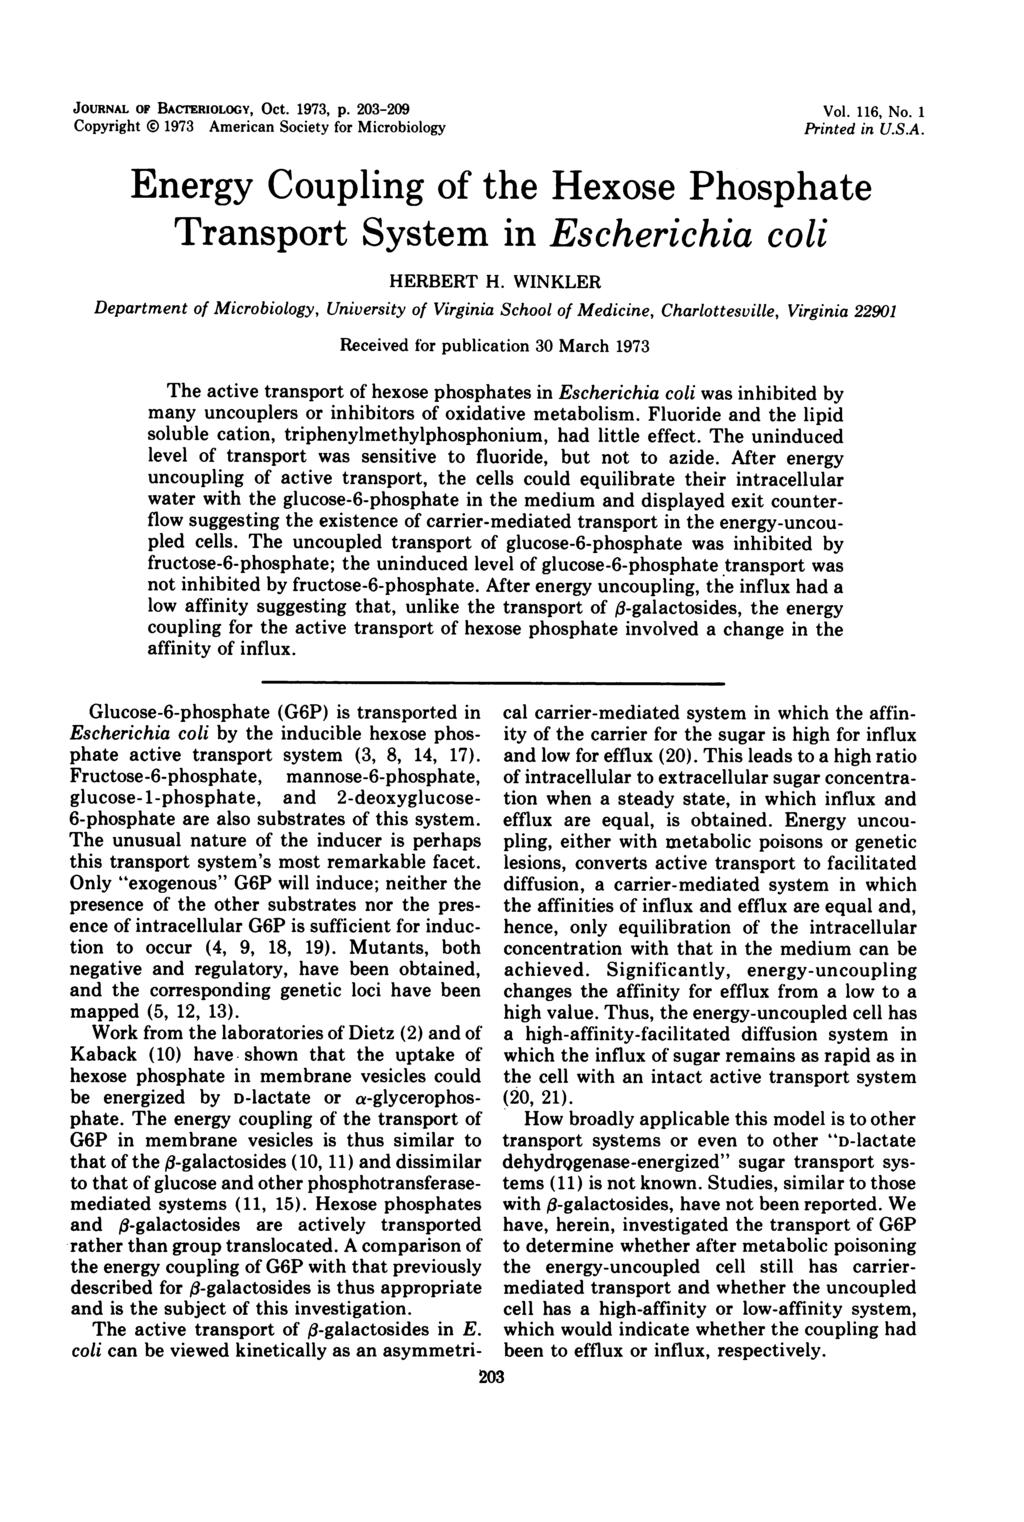 JOURNAL OF BACTERIOLOGY, Oct. 1973, p. 203-209 Copyright 6 1973 American Society for Microbiology Vol. 116, No. 1 Printed in U.S.A. Energy Coupling of the Hexose Phosphate Transport System in Escherichia coli HERBERT H.